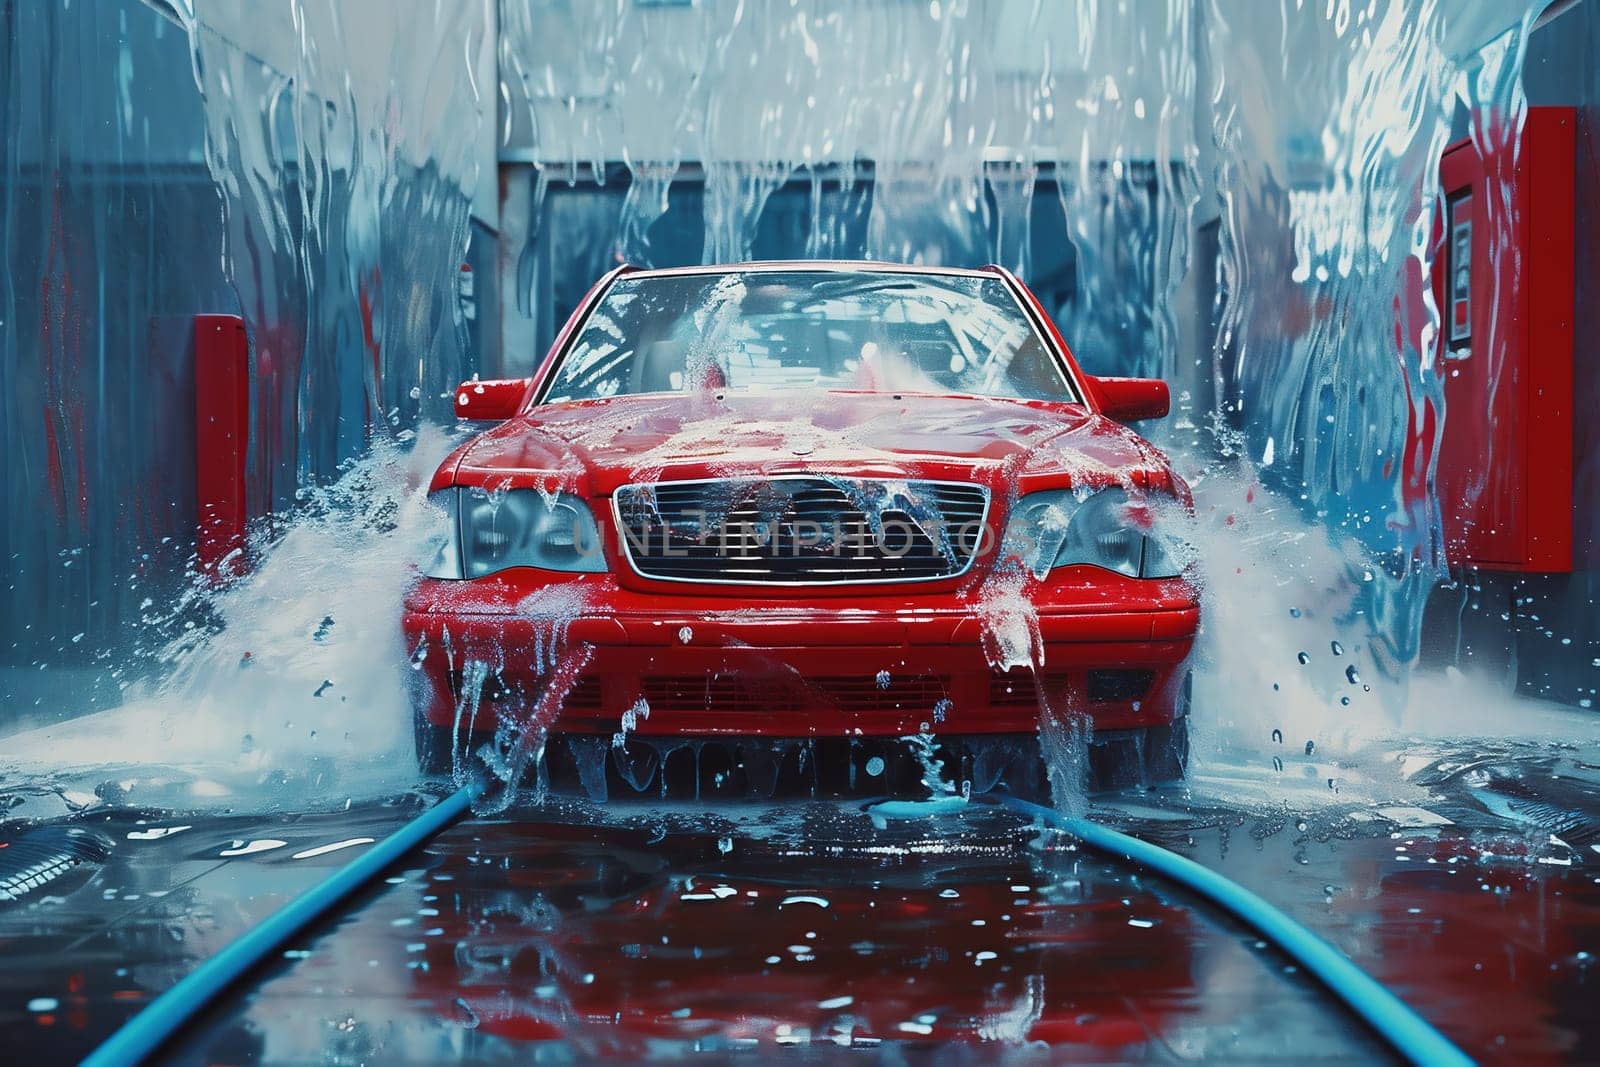 A car running through an automatic car wash with brushes and water hitting the vehicle. by Andelov13